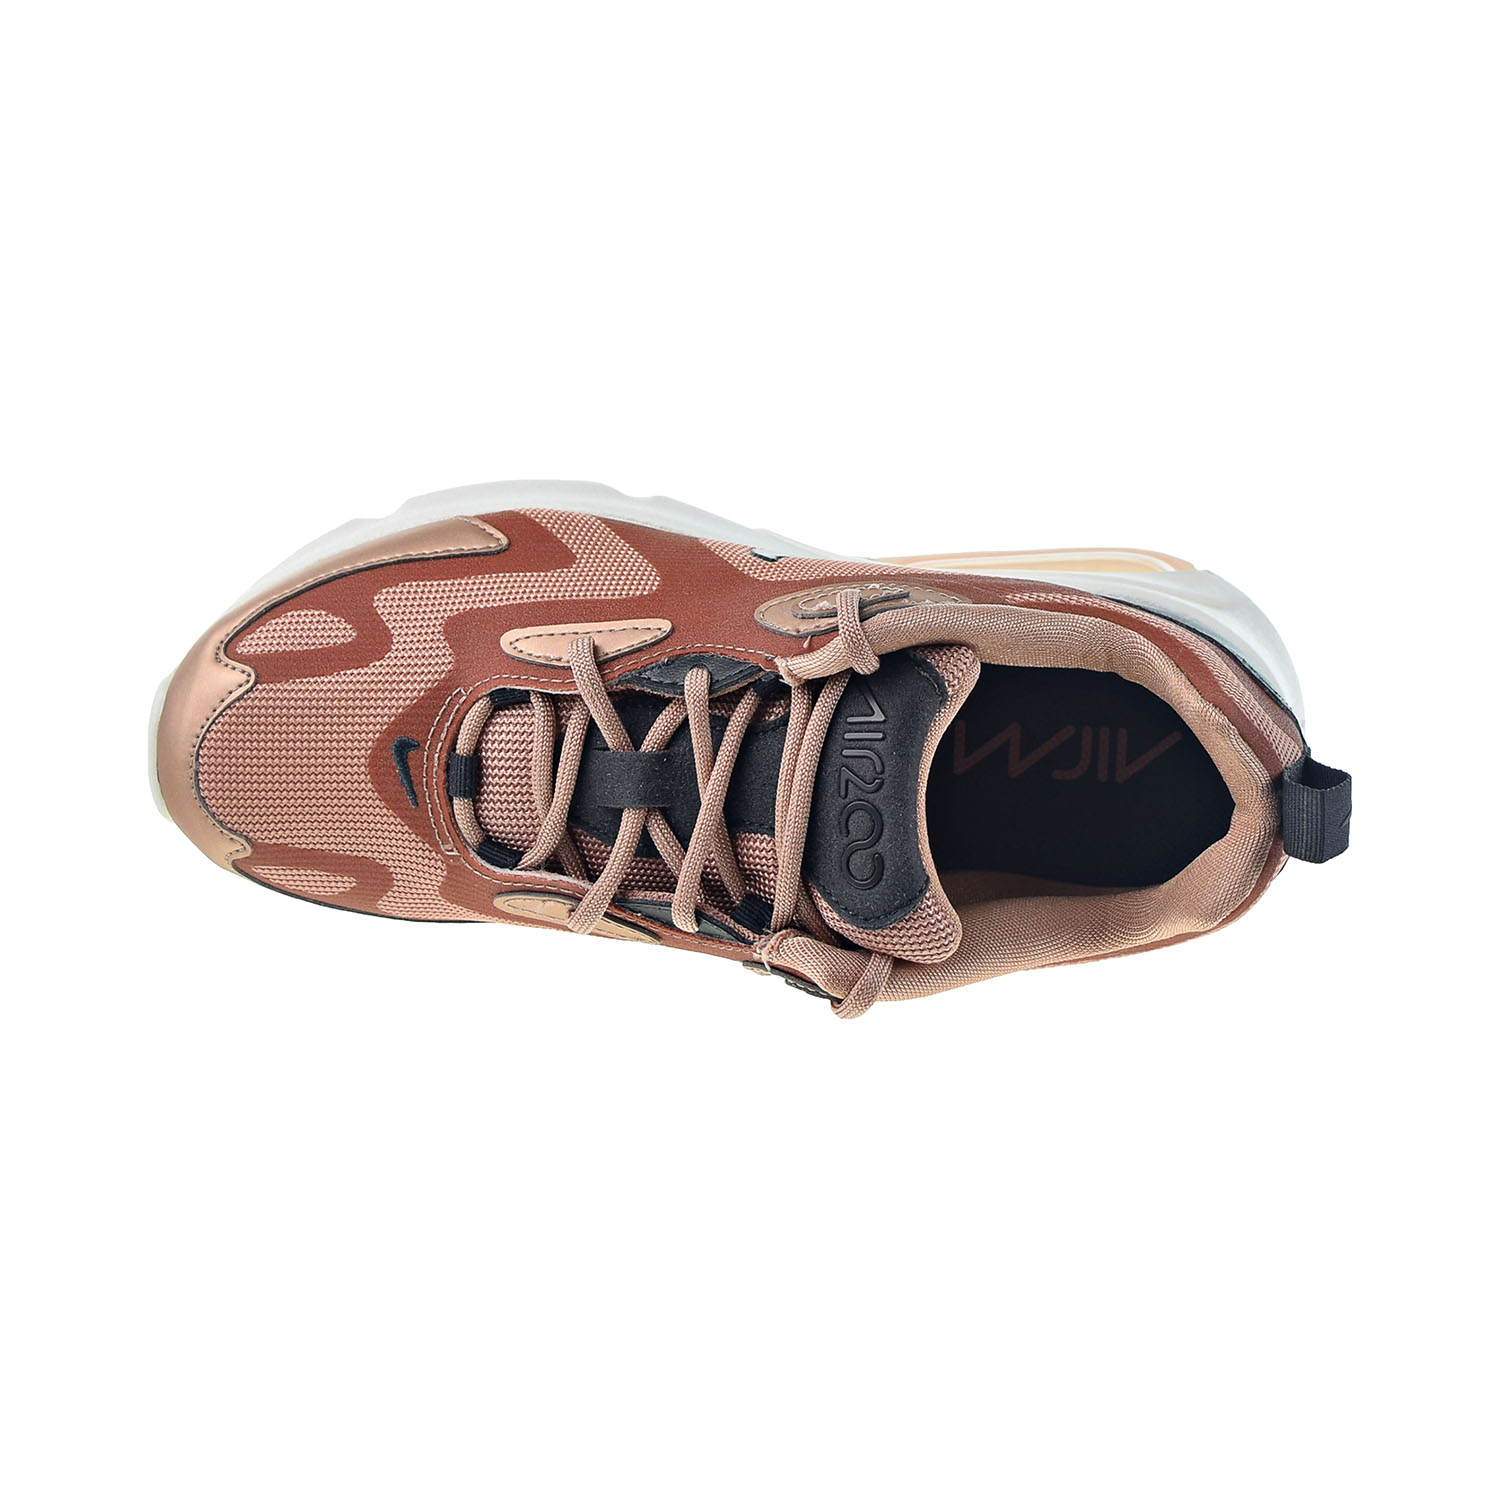 Nike Air Max 200 "Holiday Sparkle" Women's Shoes Metallic Red-Bronze ct1185-900 - image 5 of 6